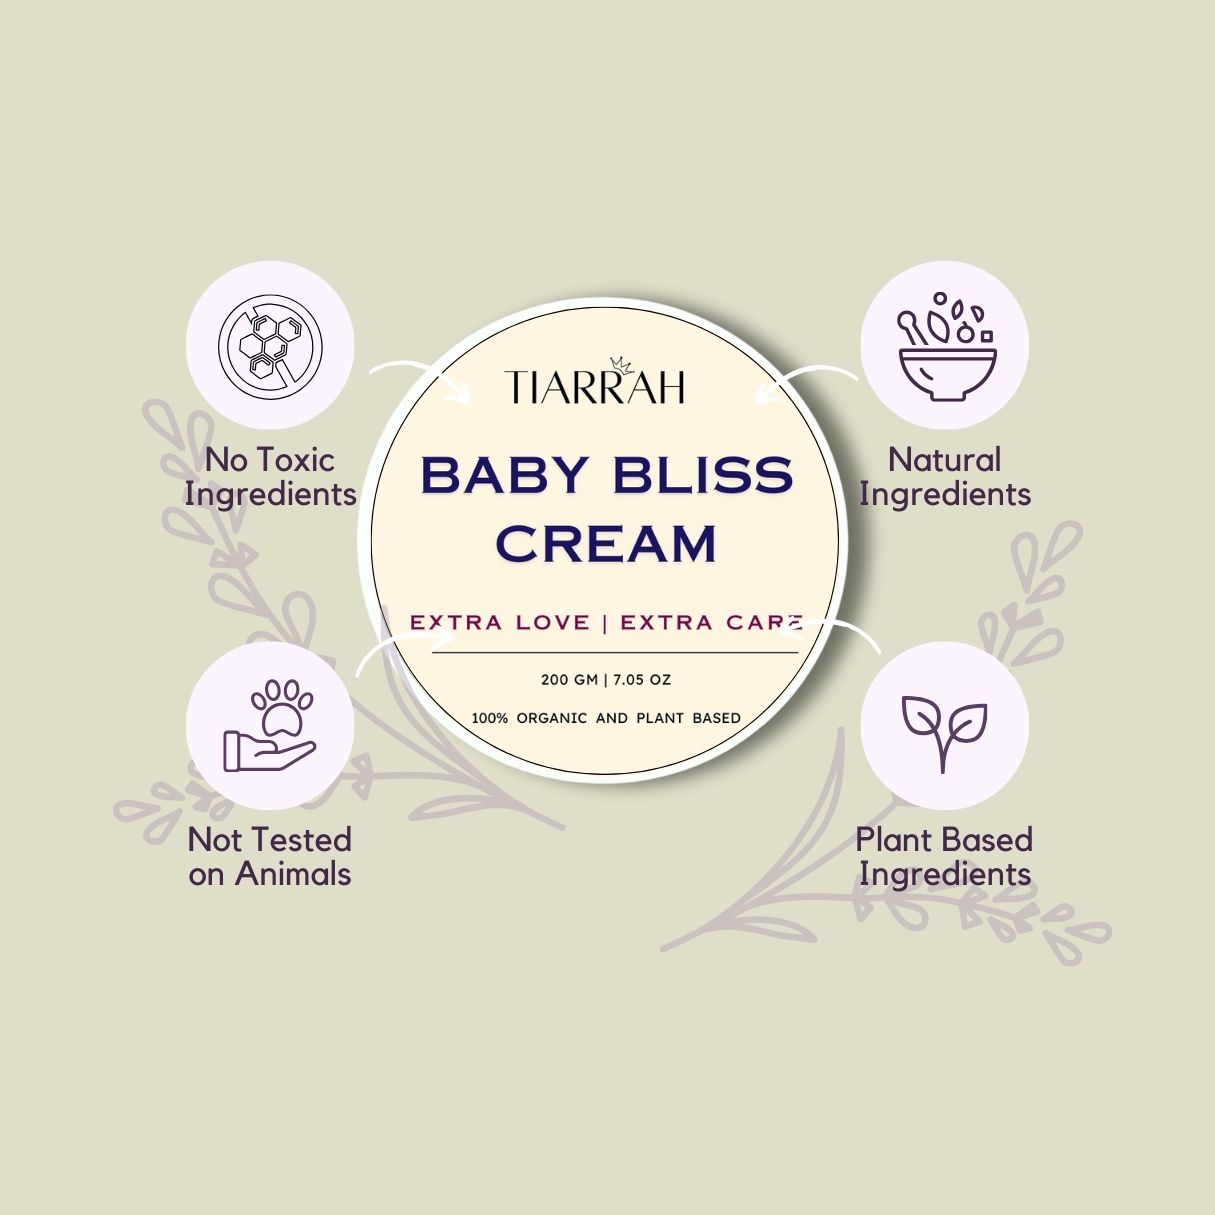 Organic Baby Bliss Cream from Tiarrah - The Luxury Bath and Body Care Shop